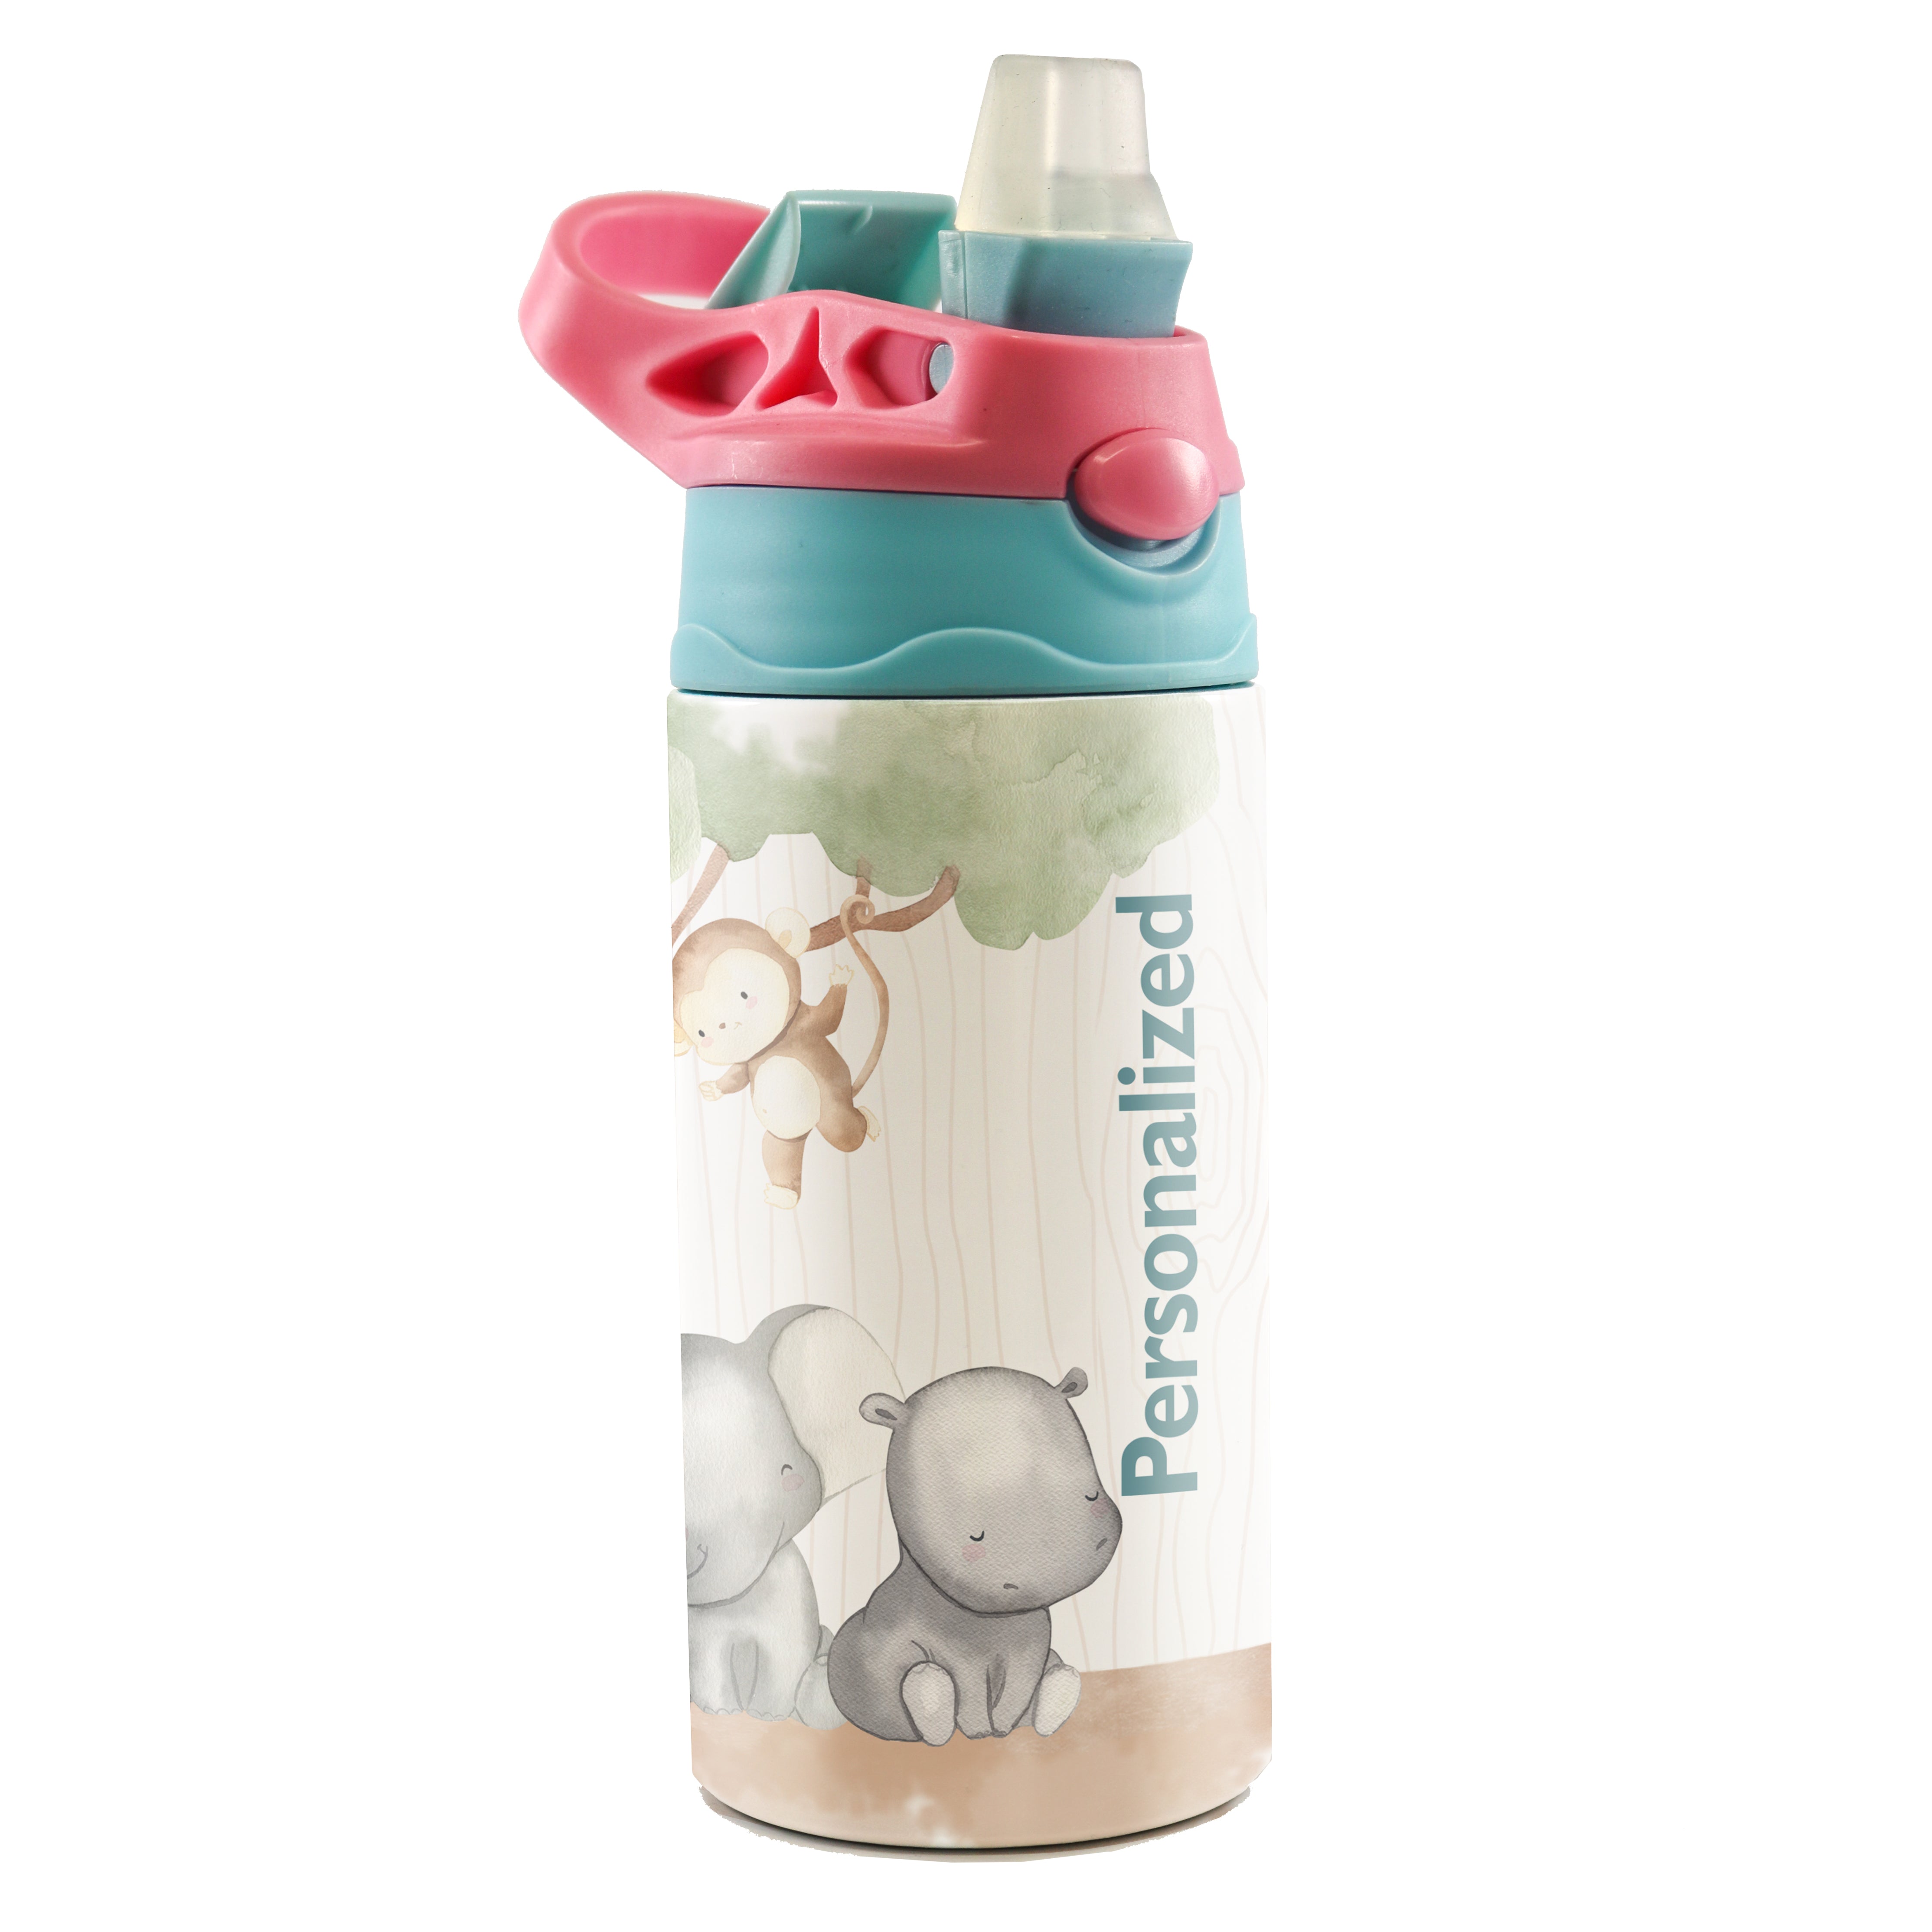 Personalized Kids Water Bottle 12 oz - Name